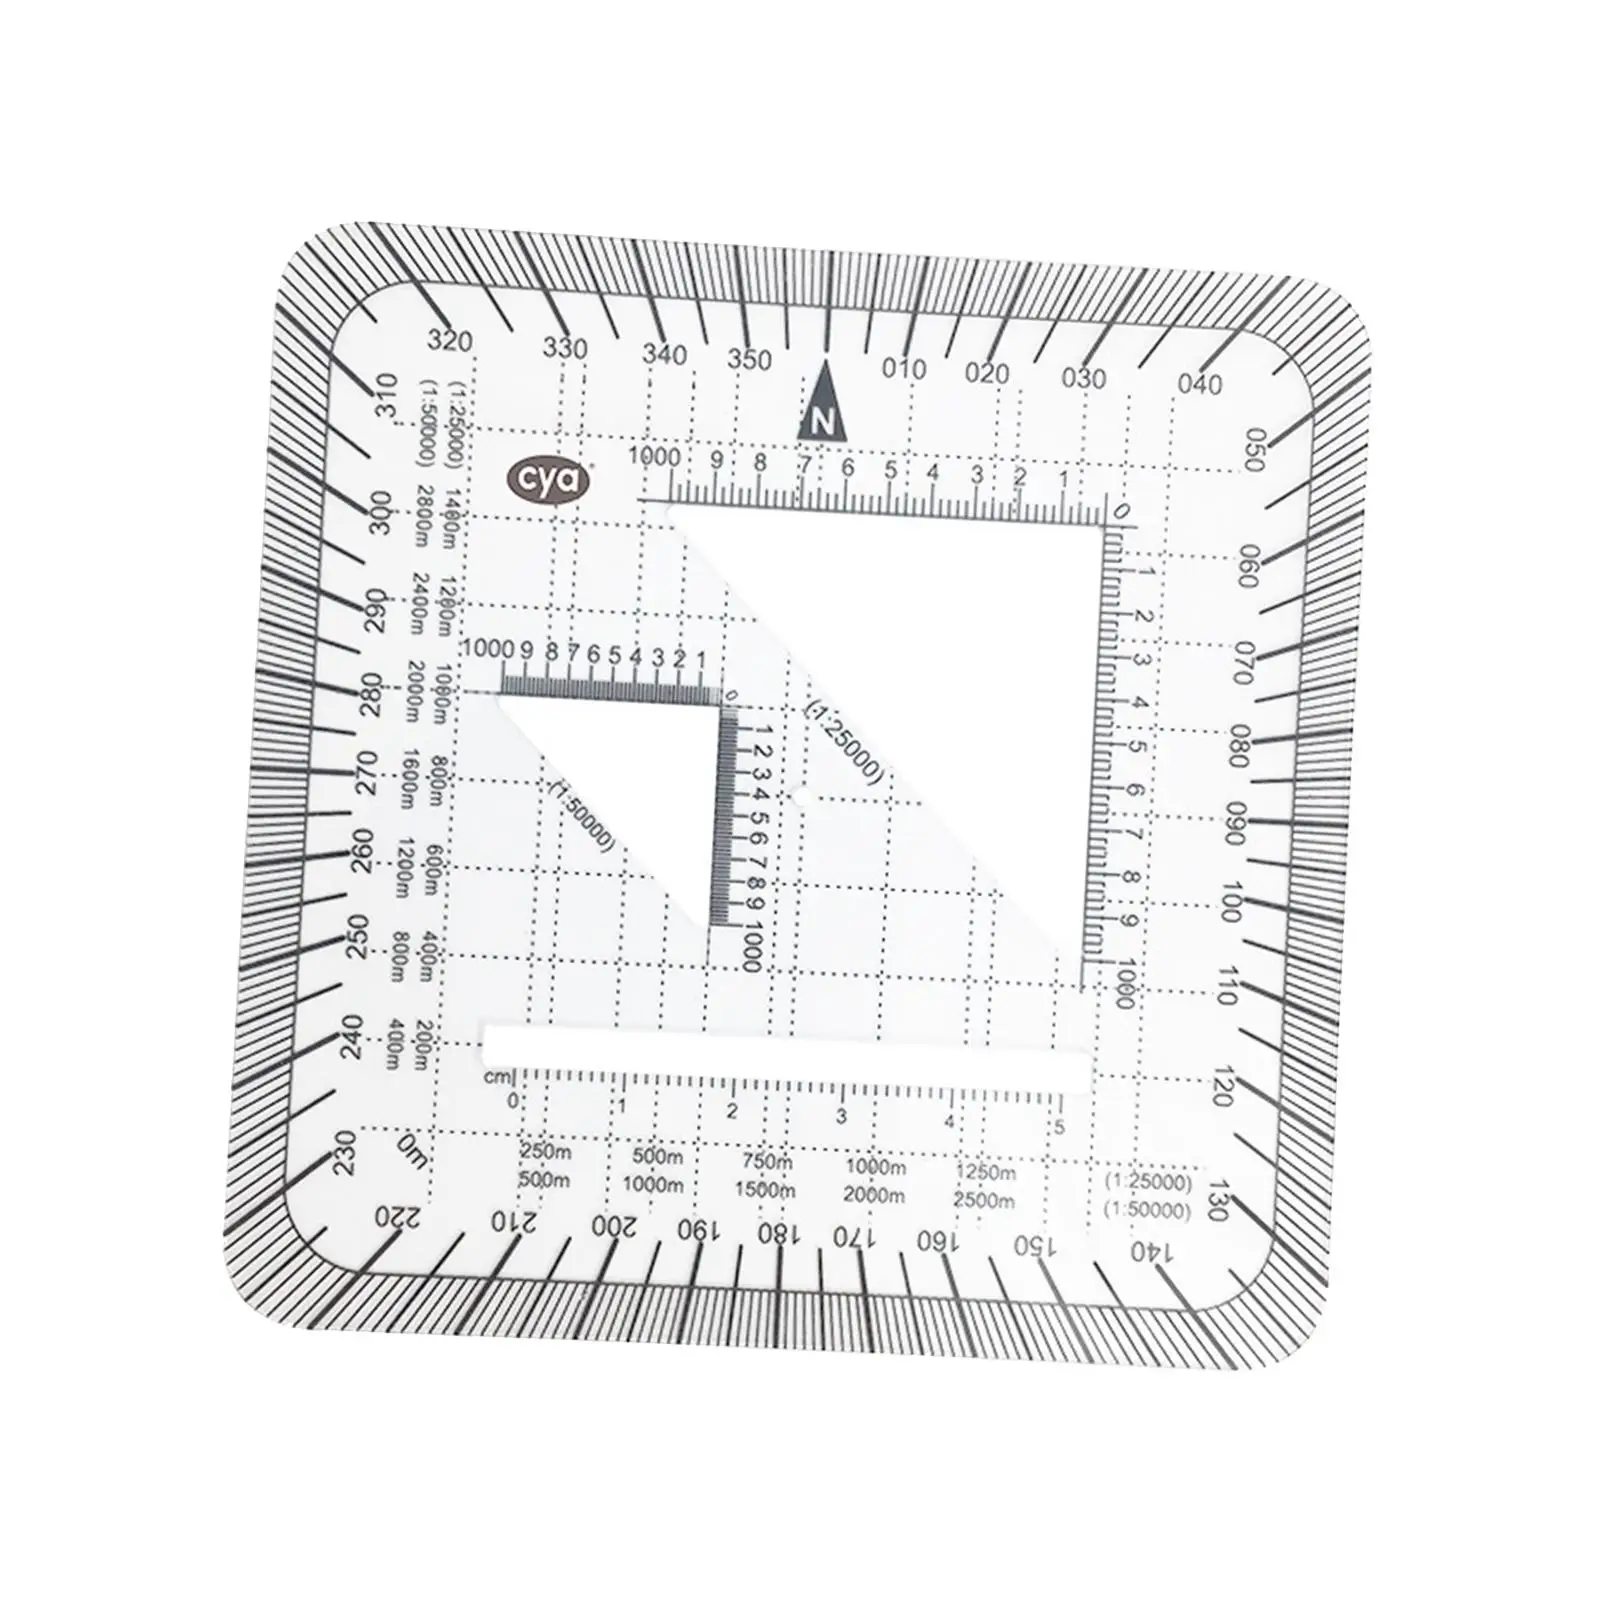 Protractor Ruler Square Acrylic Drawing Architecture Learning for Poltting Utm, Usng, Mgrs Coordinates Land Navigation Traveling